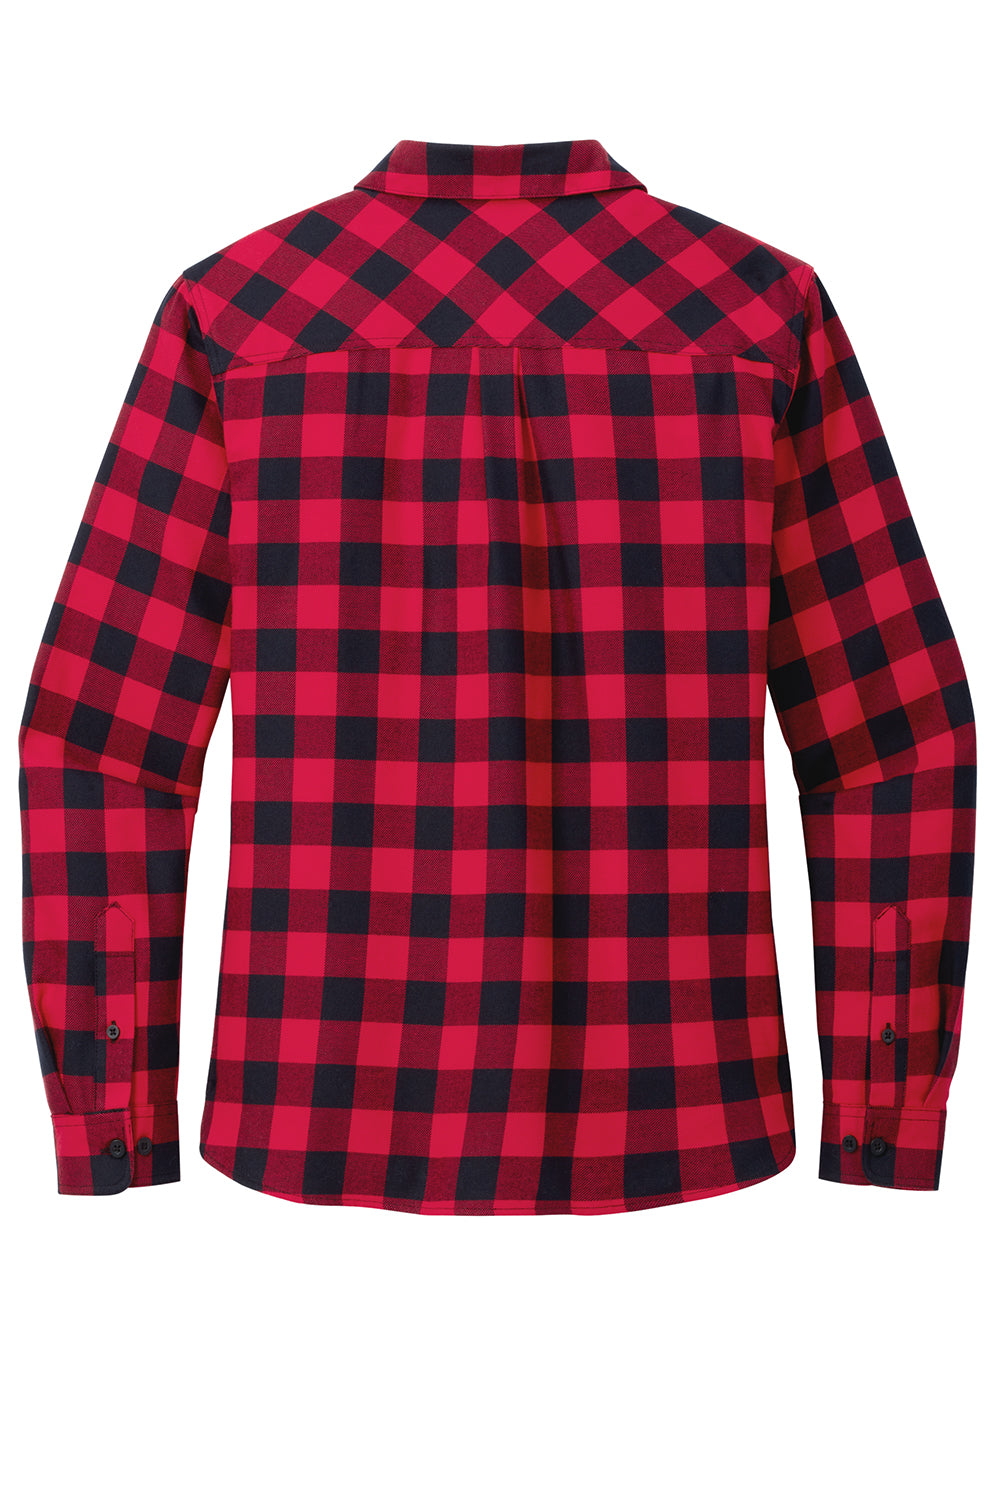 Port Authority LW669 Womens Plaid Flannel Long Sleeve Button Down Shirt Red/Black Buffalo Flat Back